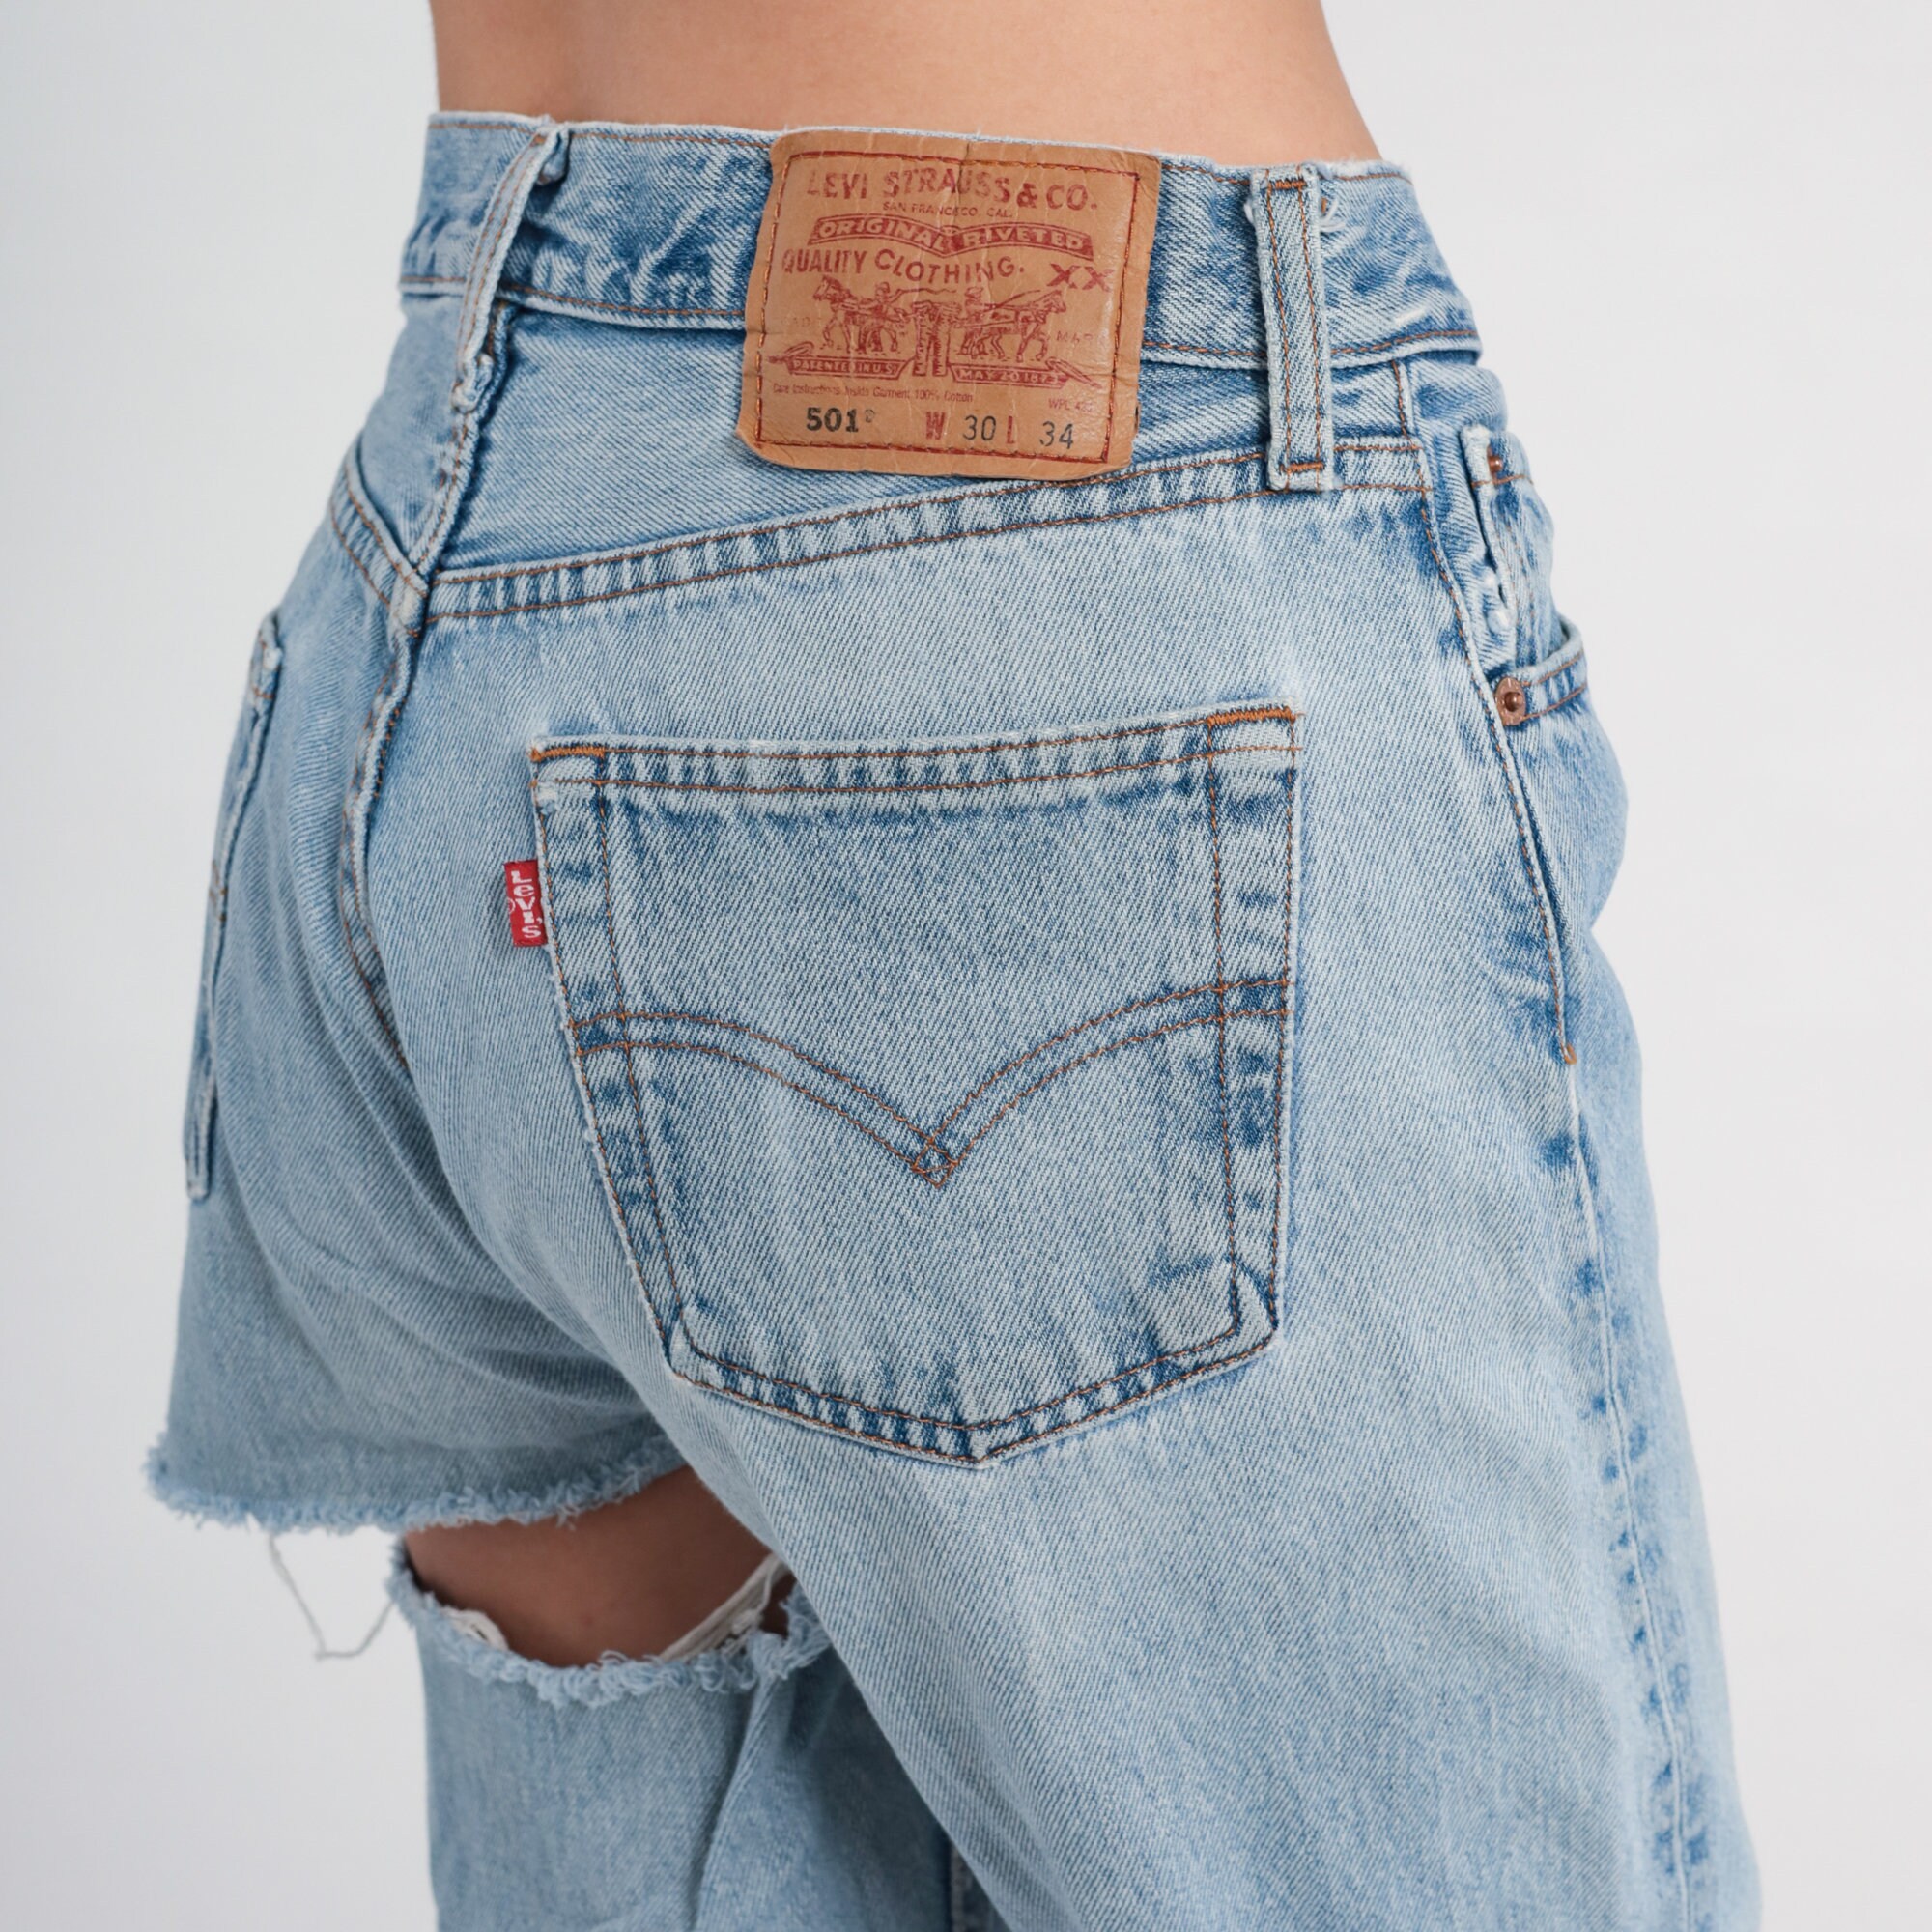 Ripped Levis Jeans Y2K Levi 501 Butt Rip Mid Rise Waist Jeans - Etsy Canada